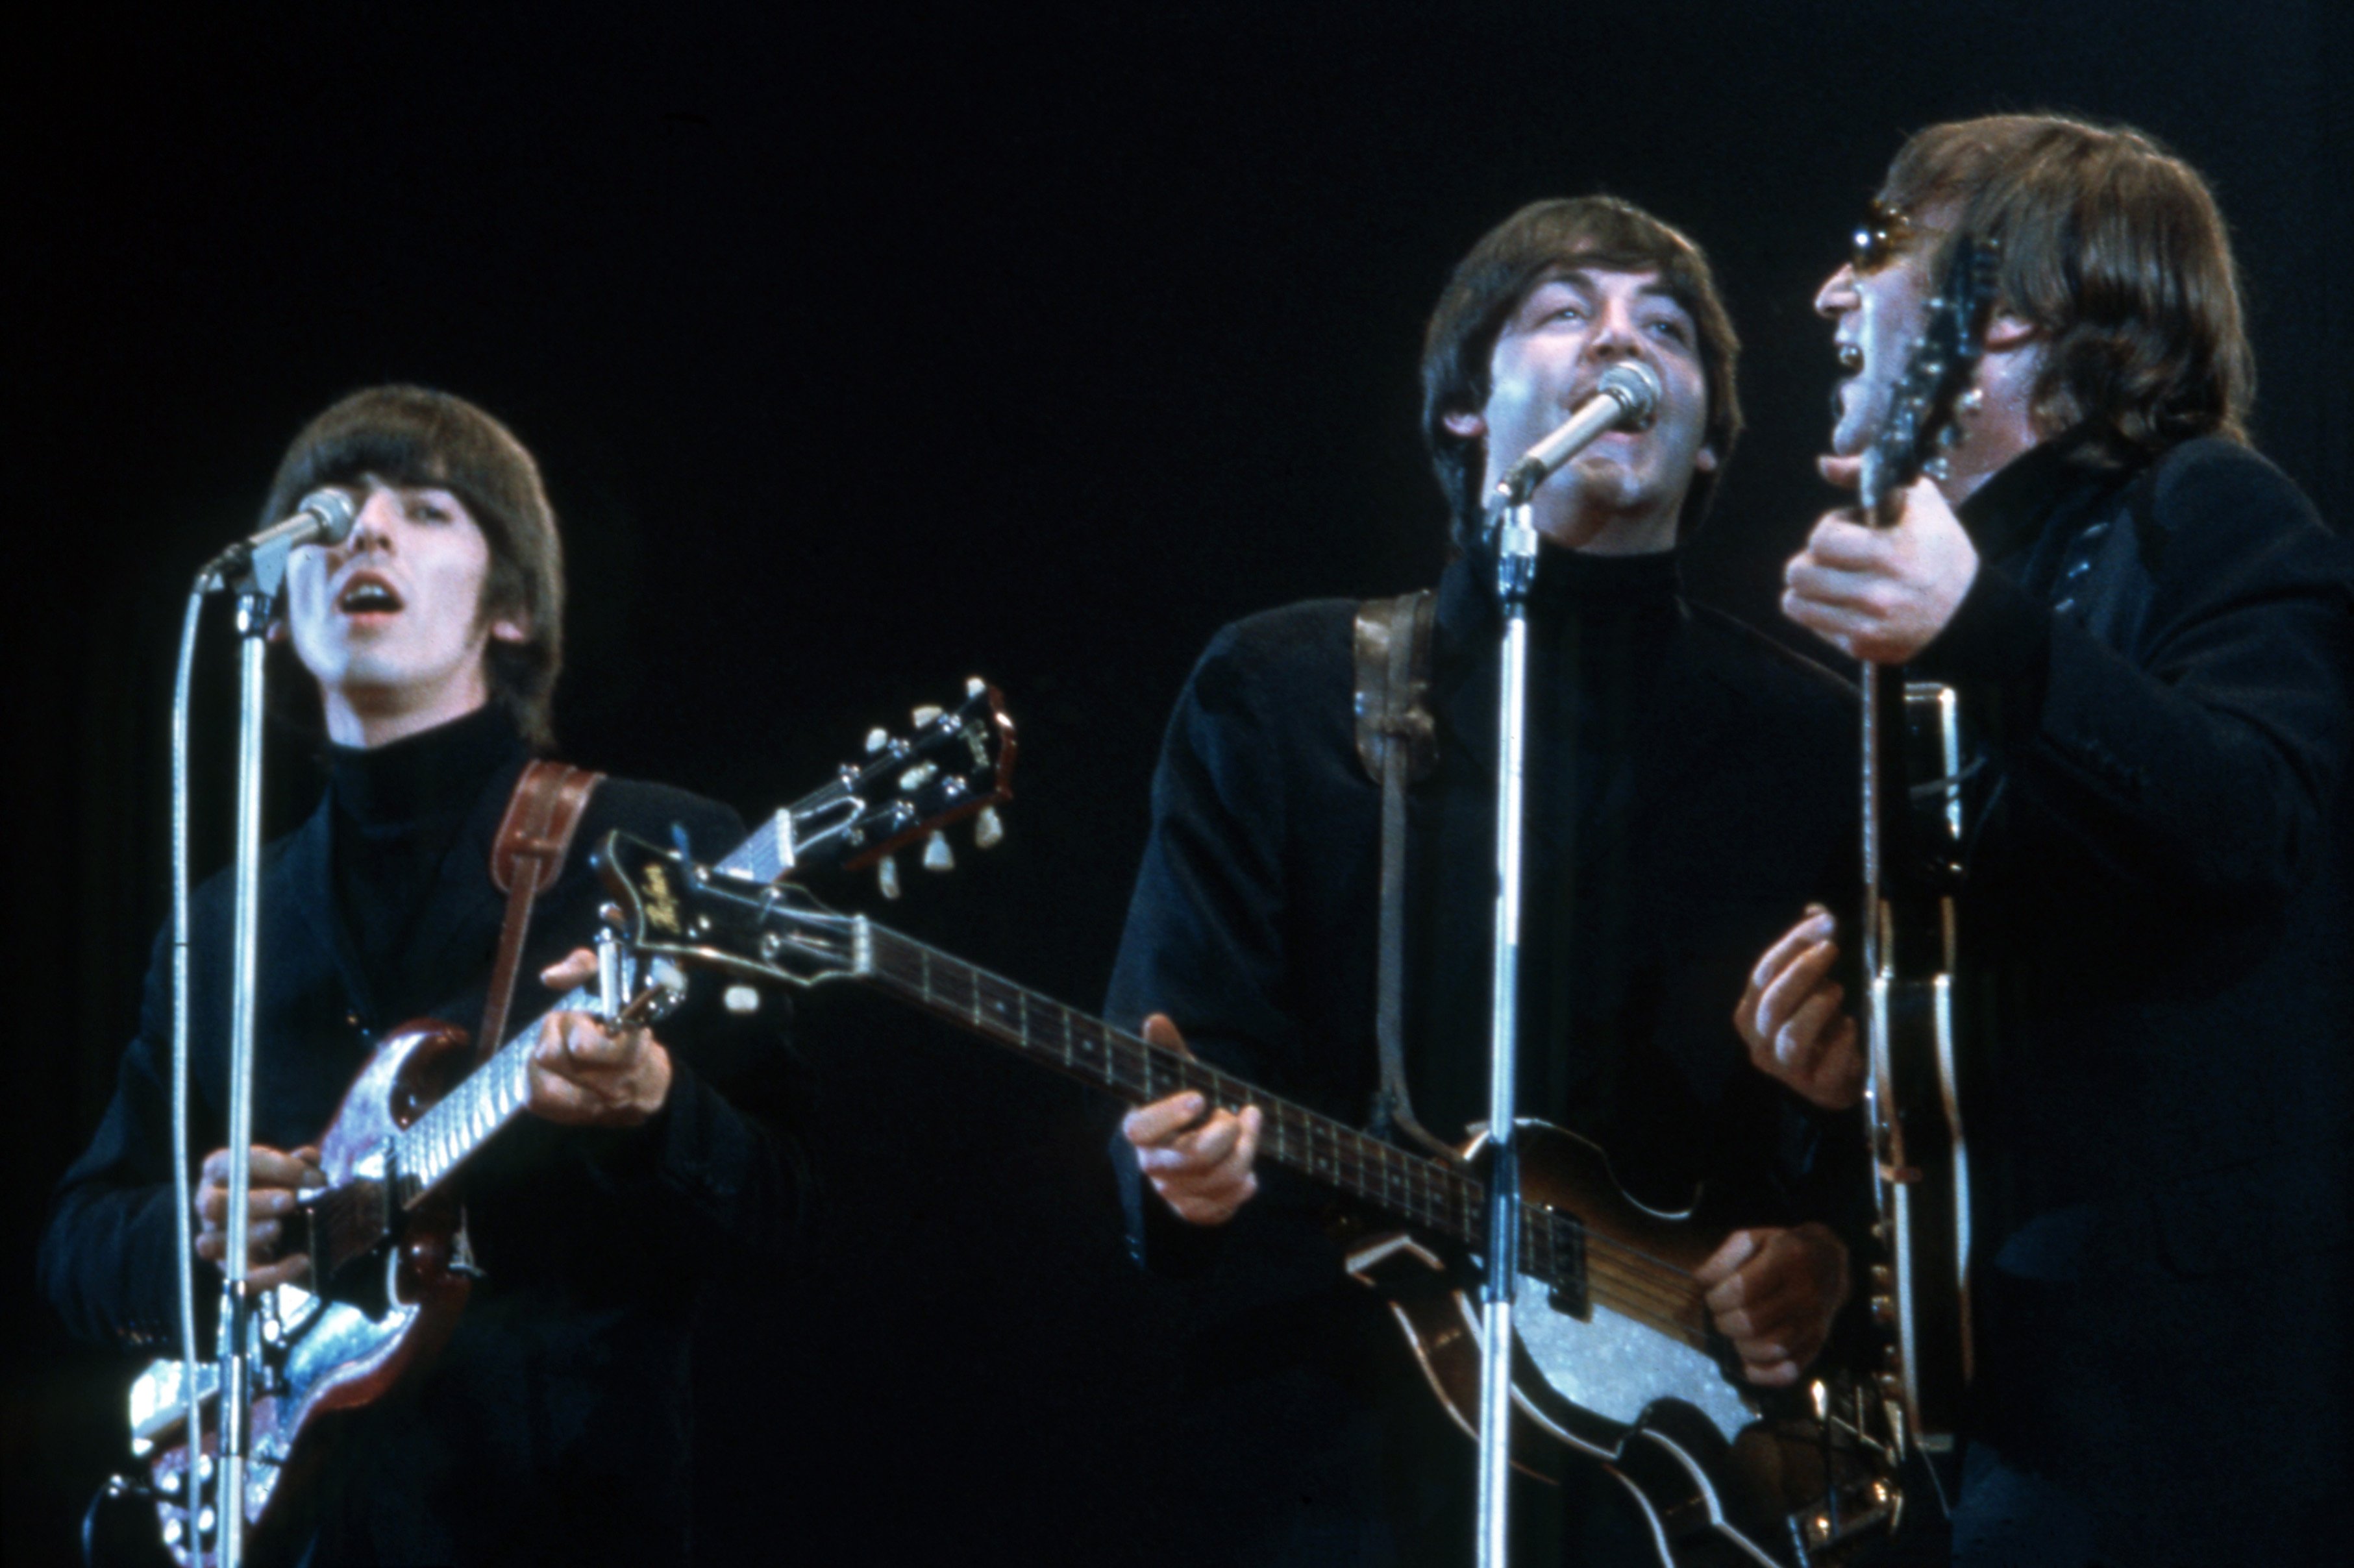 The Beatles perform at Empire Pool in Wembley at the New Musical Express Annual Poll Winner's Concert